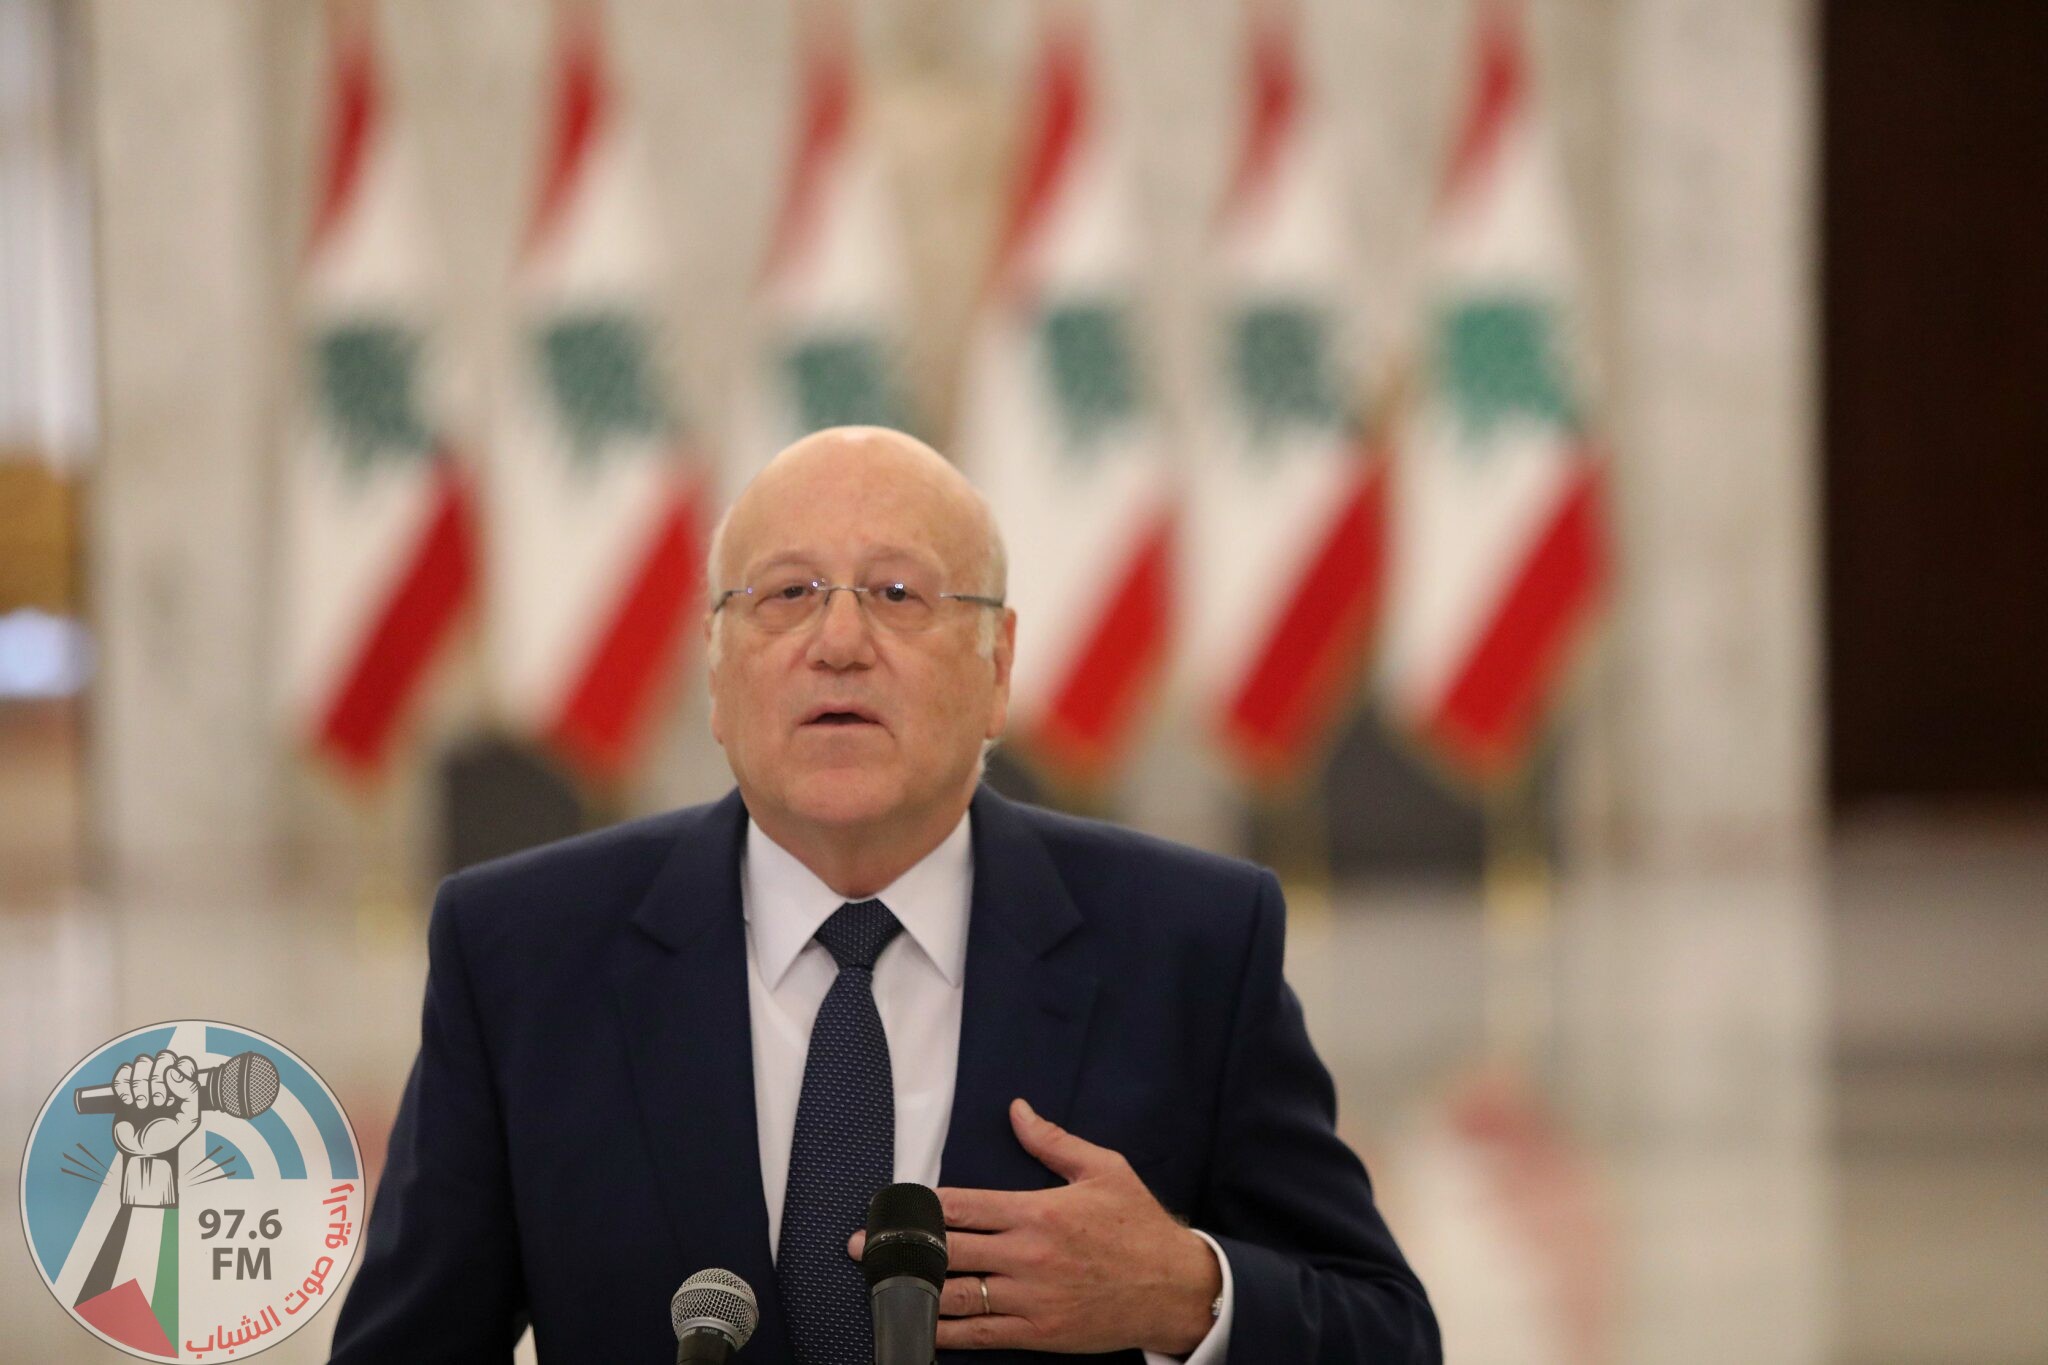 (210726) -- BAABDA (LEBANON), July 26, 2021 (Xinhua) -- Najib Mikati gives a speech following his appointment at Baabda Palace near Beirut, Lebanon, on July 26, 2021. Newly appointed Lebanese Prime Minister Najib Mikati vowed on Monday to quickly form a cabinet capable of implementing structural reforms based on the French initiative in cooperation with the civil society, Annahar local newspaper reported. (Xinhua/Bilal Jawich)